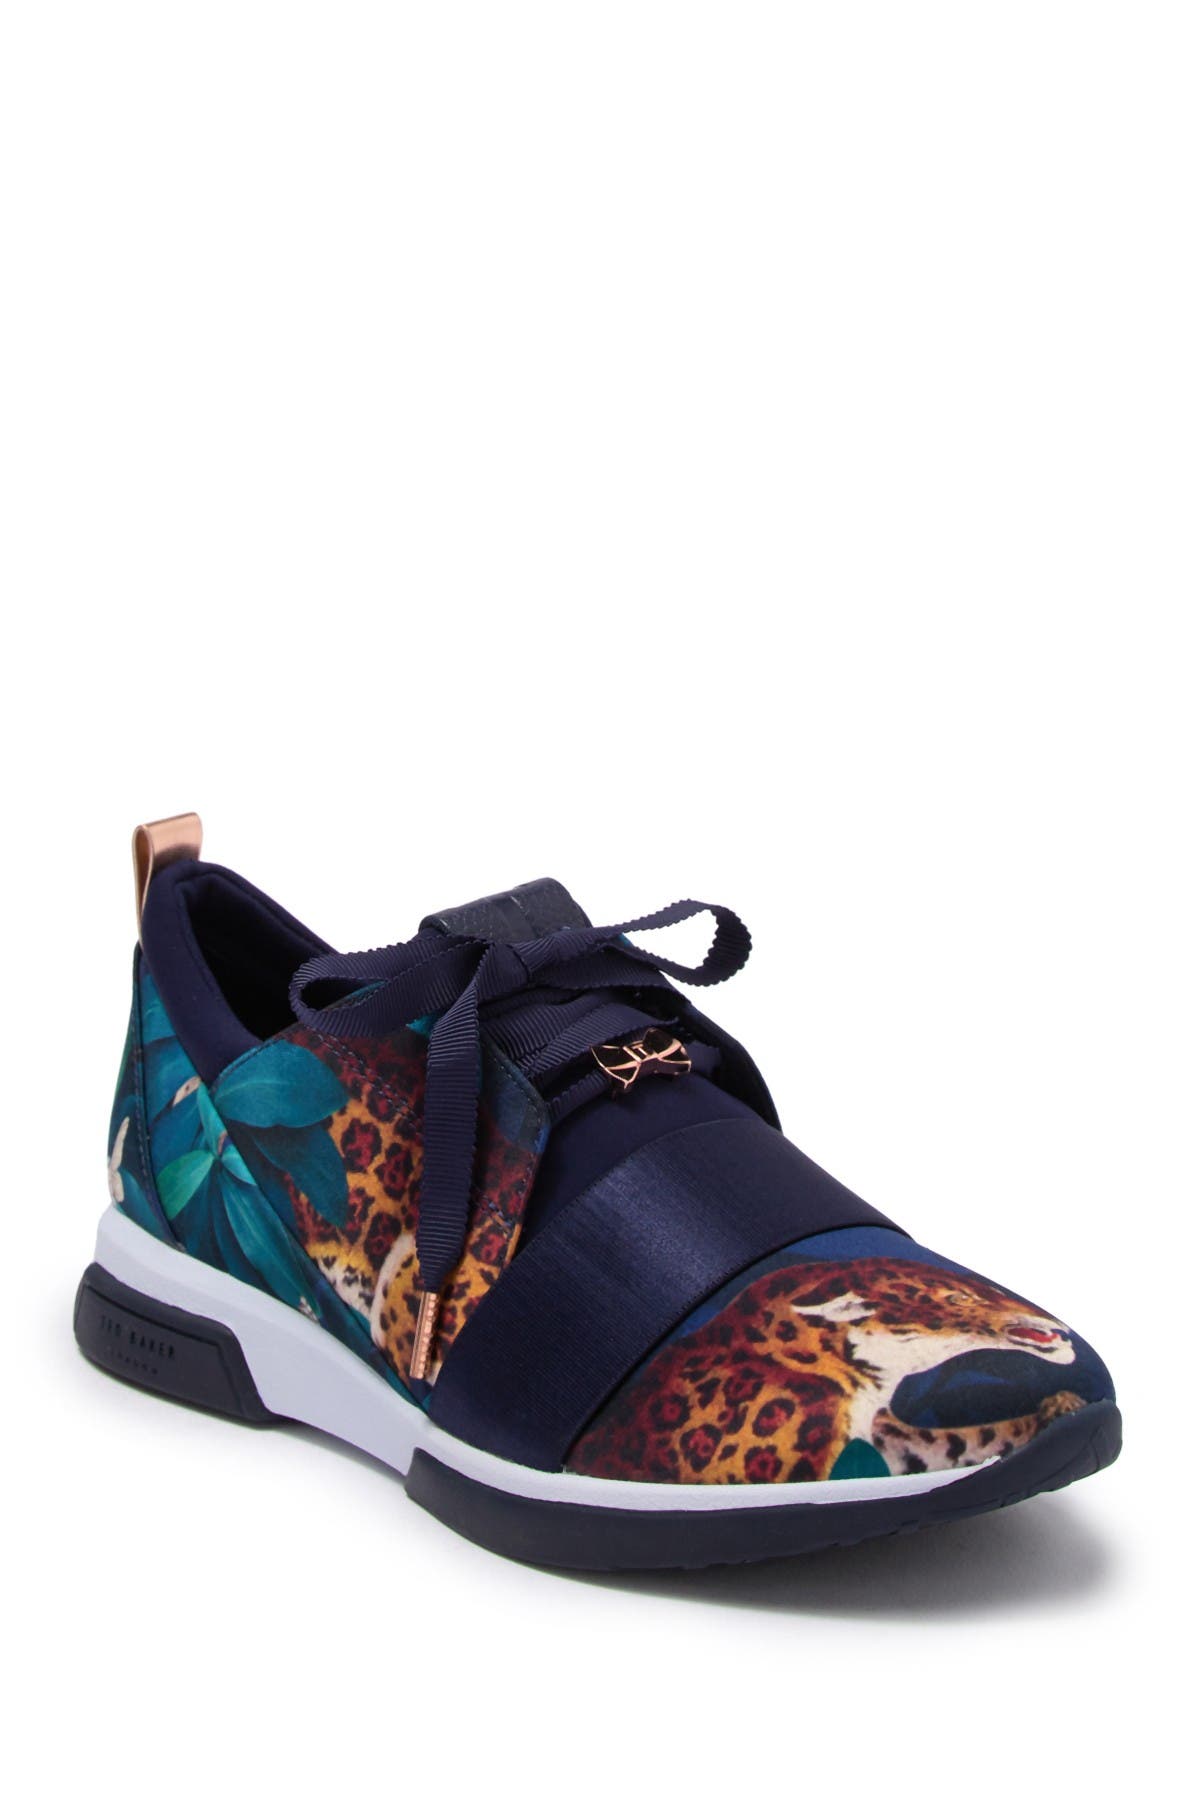 ted baker cepap 2 trainers